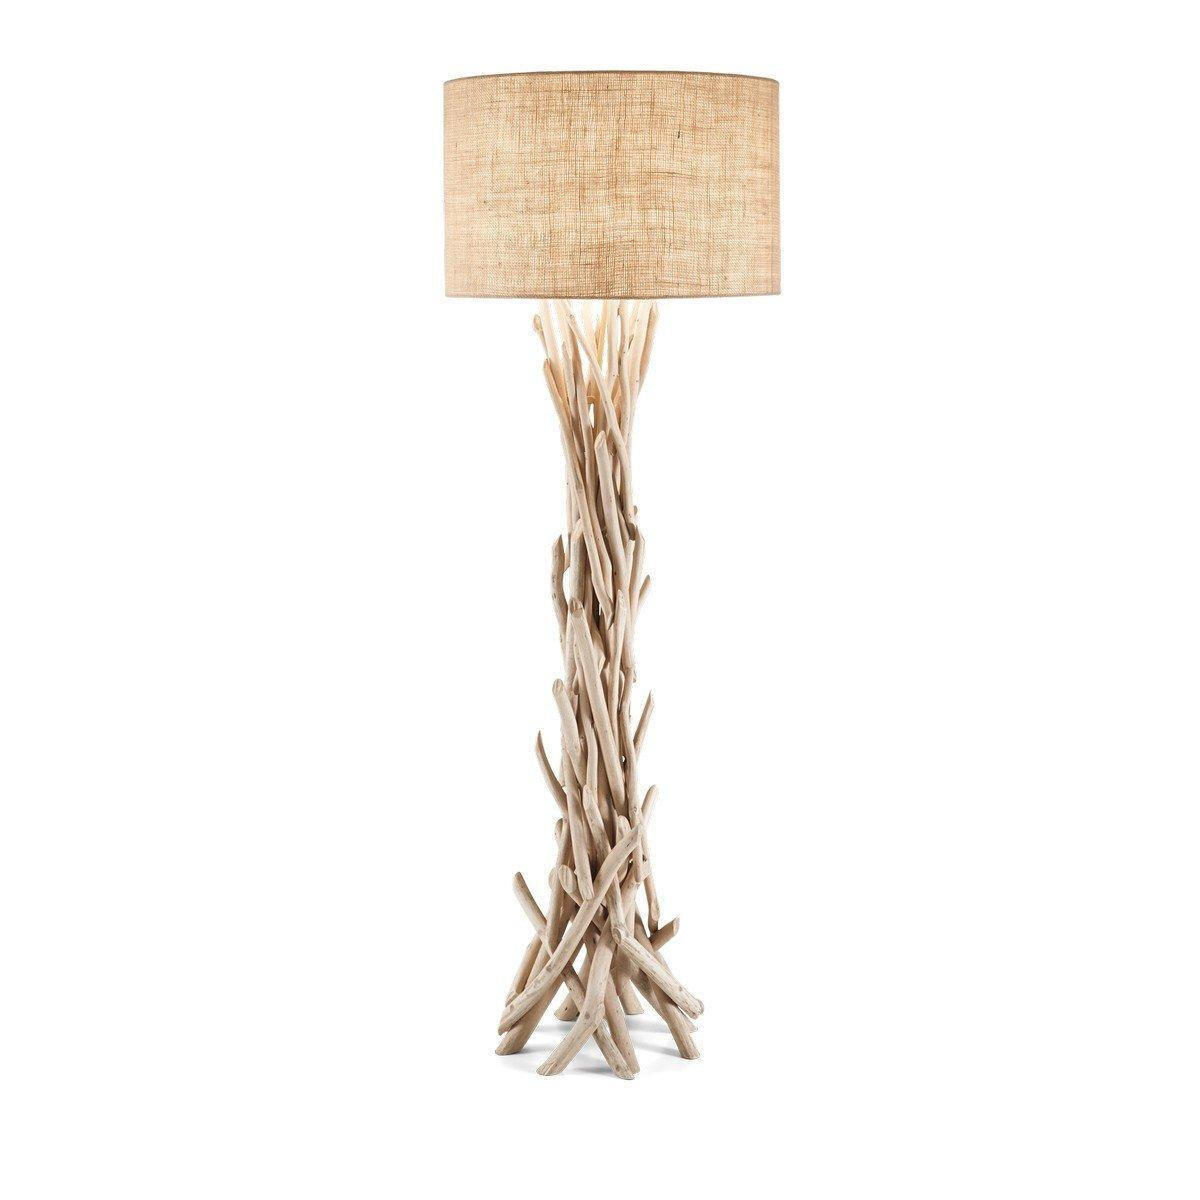 Driftwood 1 Light Floor Lamp Brown Beige with Shade E27 - image 1